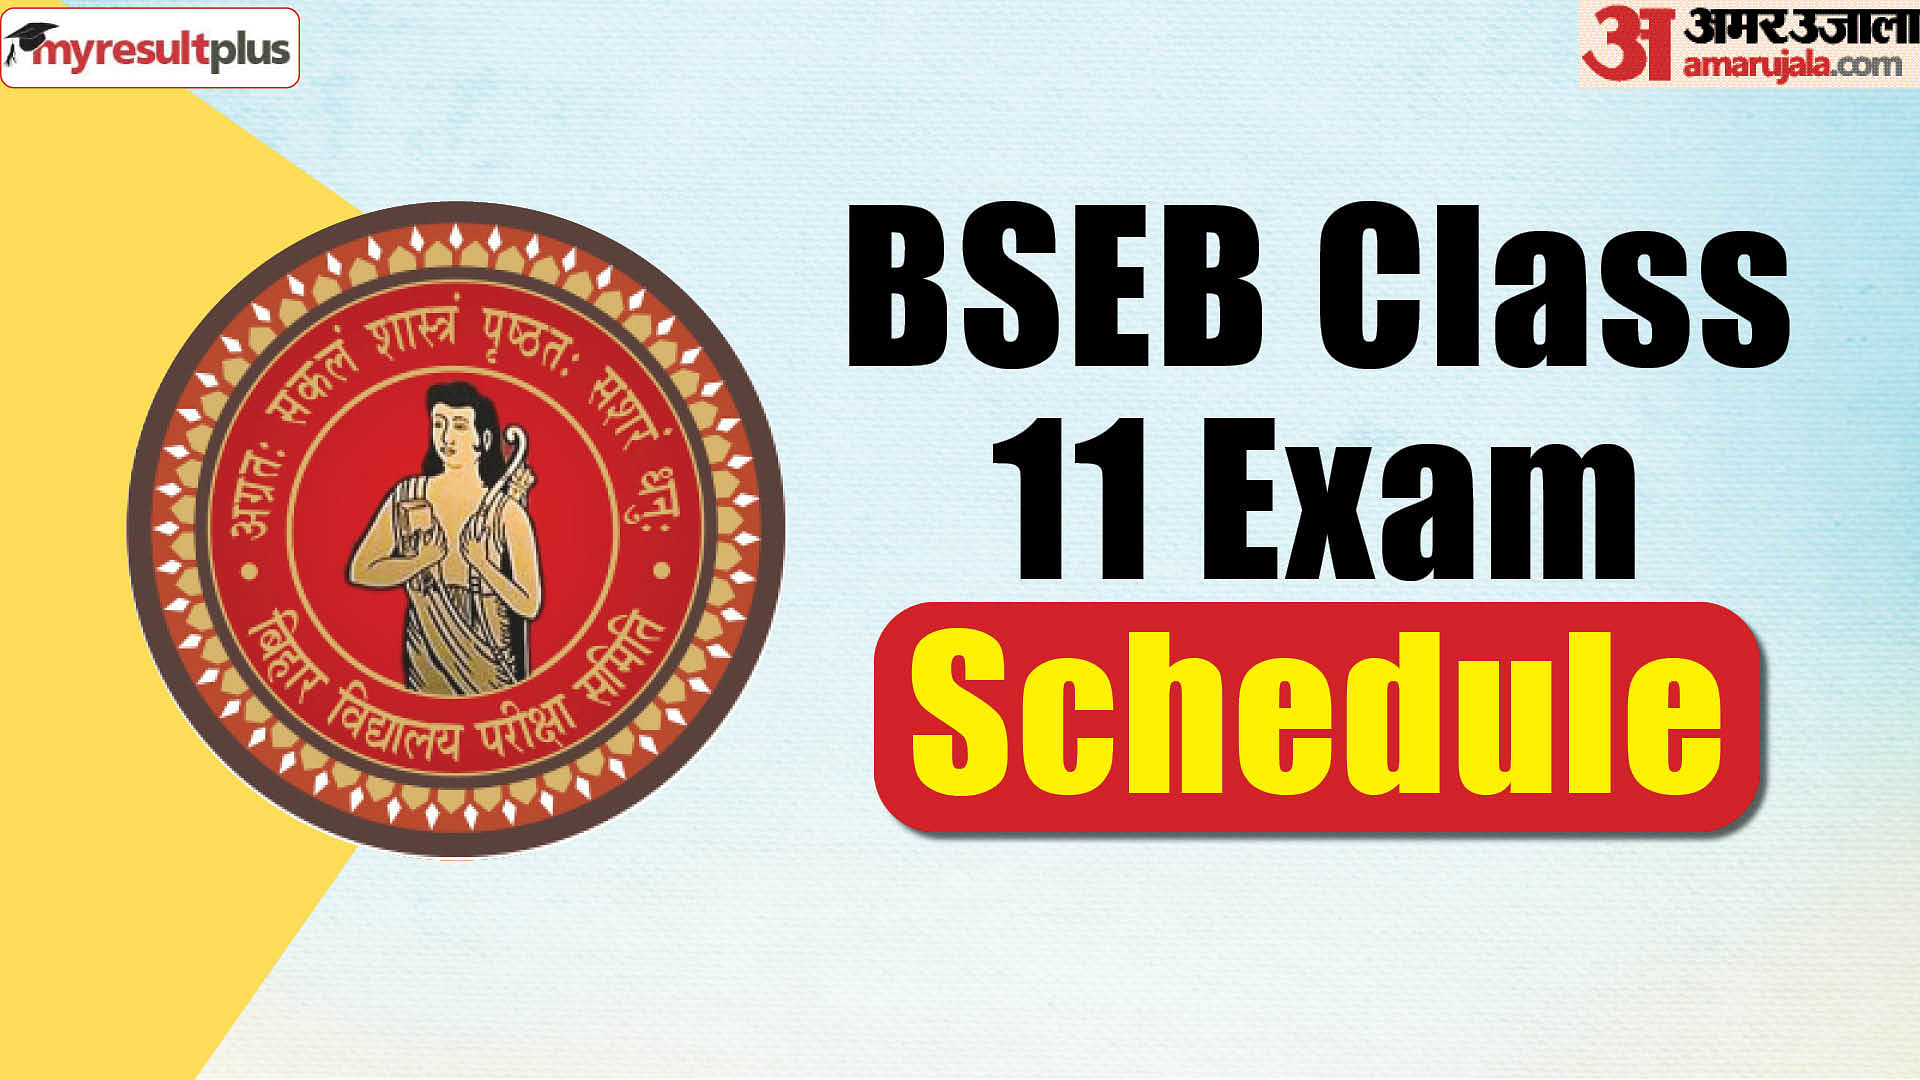 BSEB Class 11 Exam schedule out now, Check the dates and timing of exam here